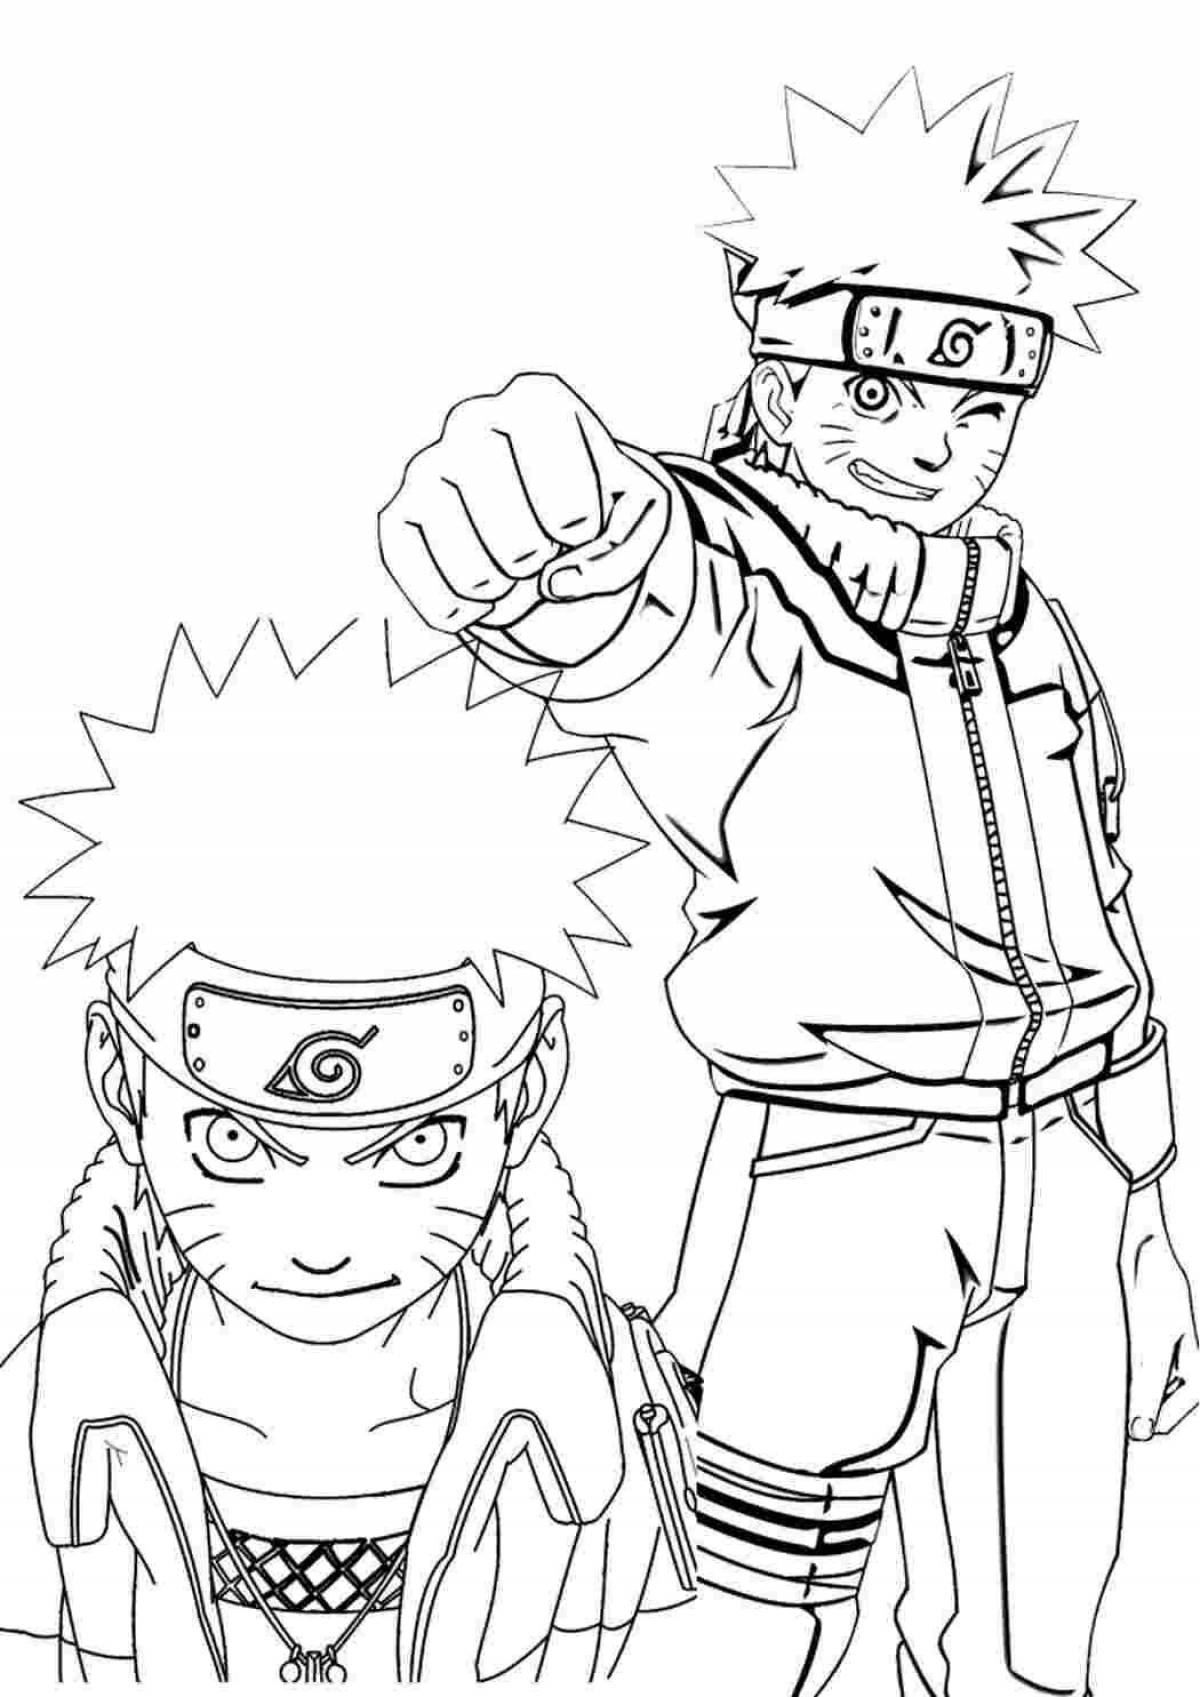 Character complex naruto anime coloring book